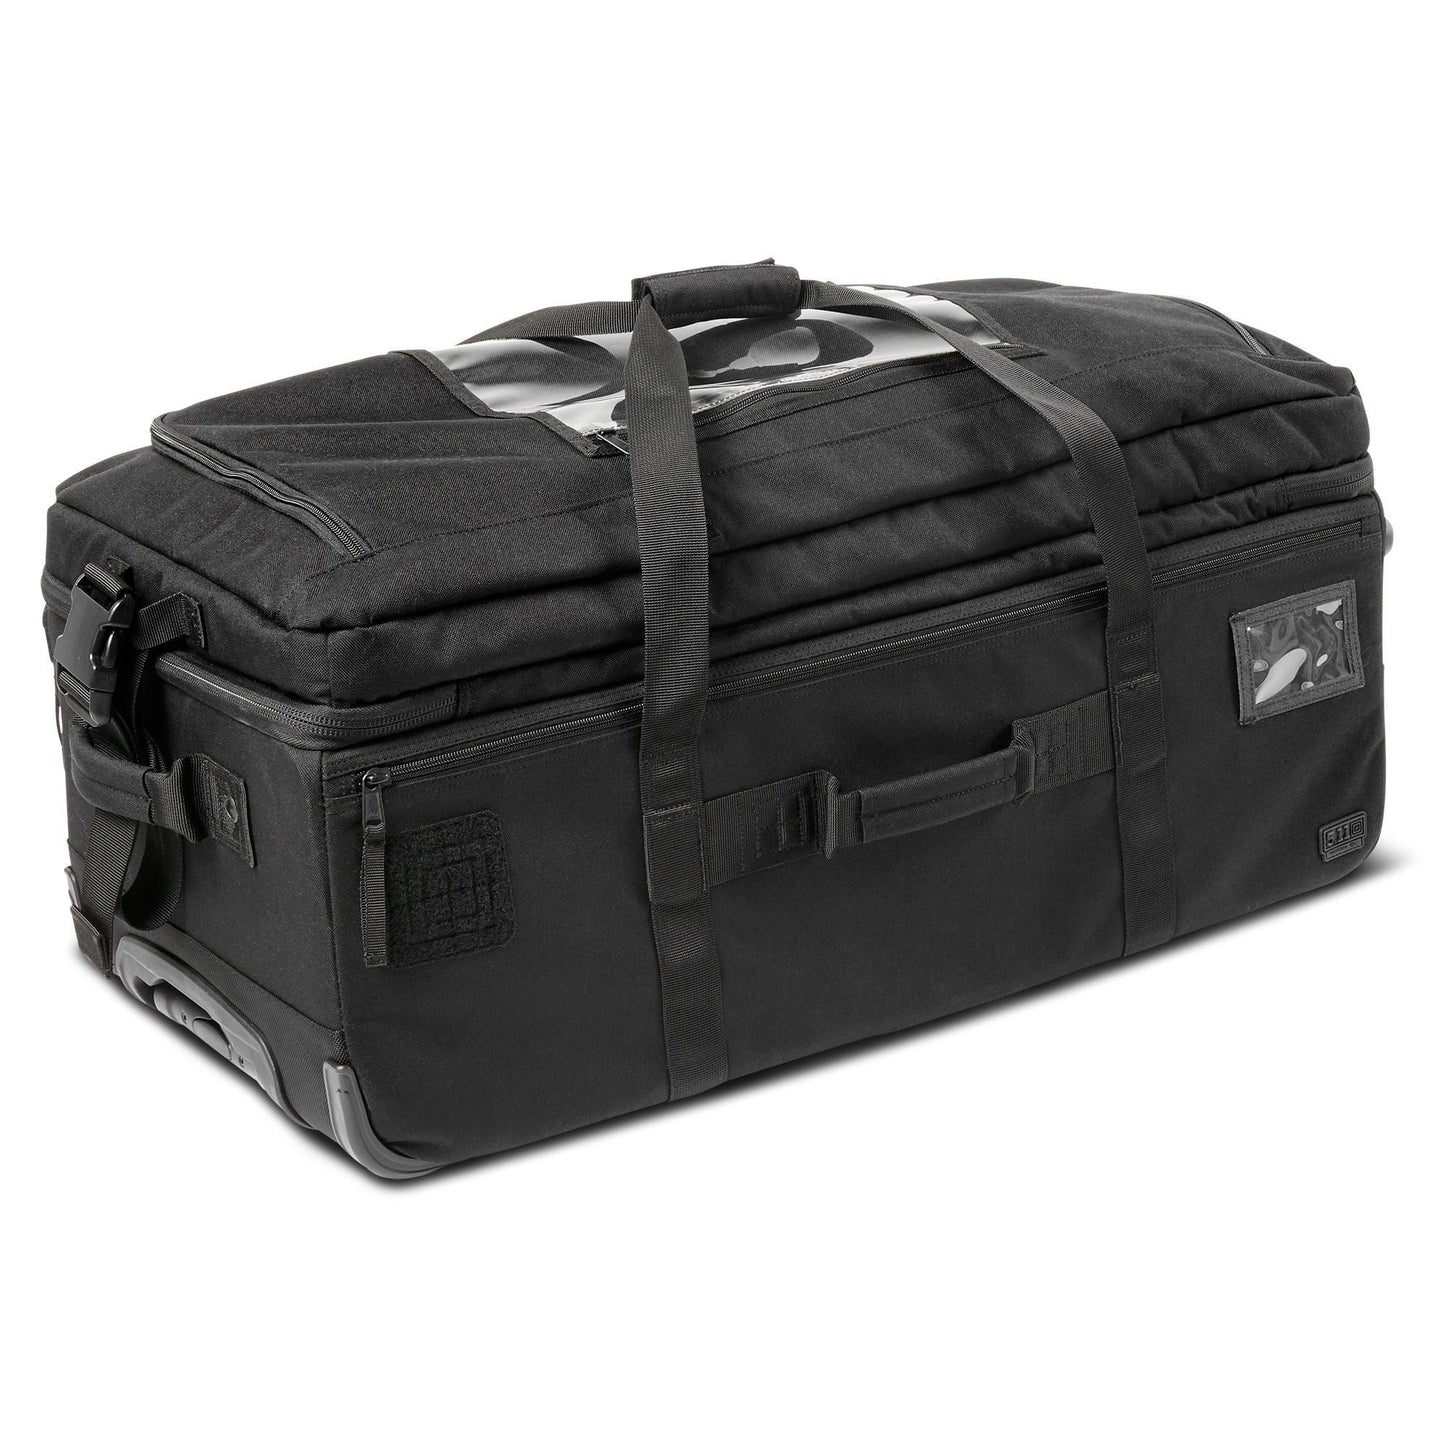 5.11 Tactical Mission Ready 3.0 Bag